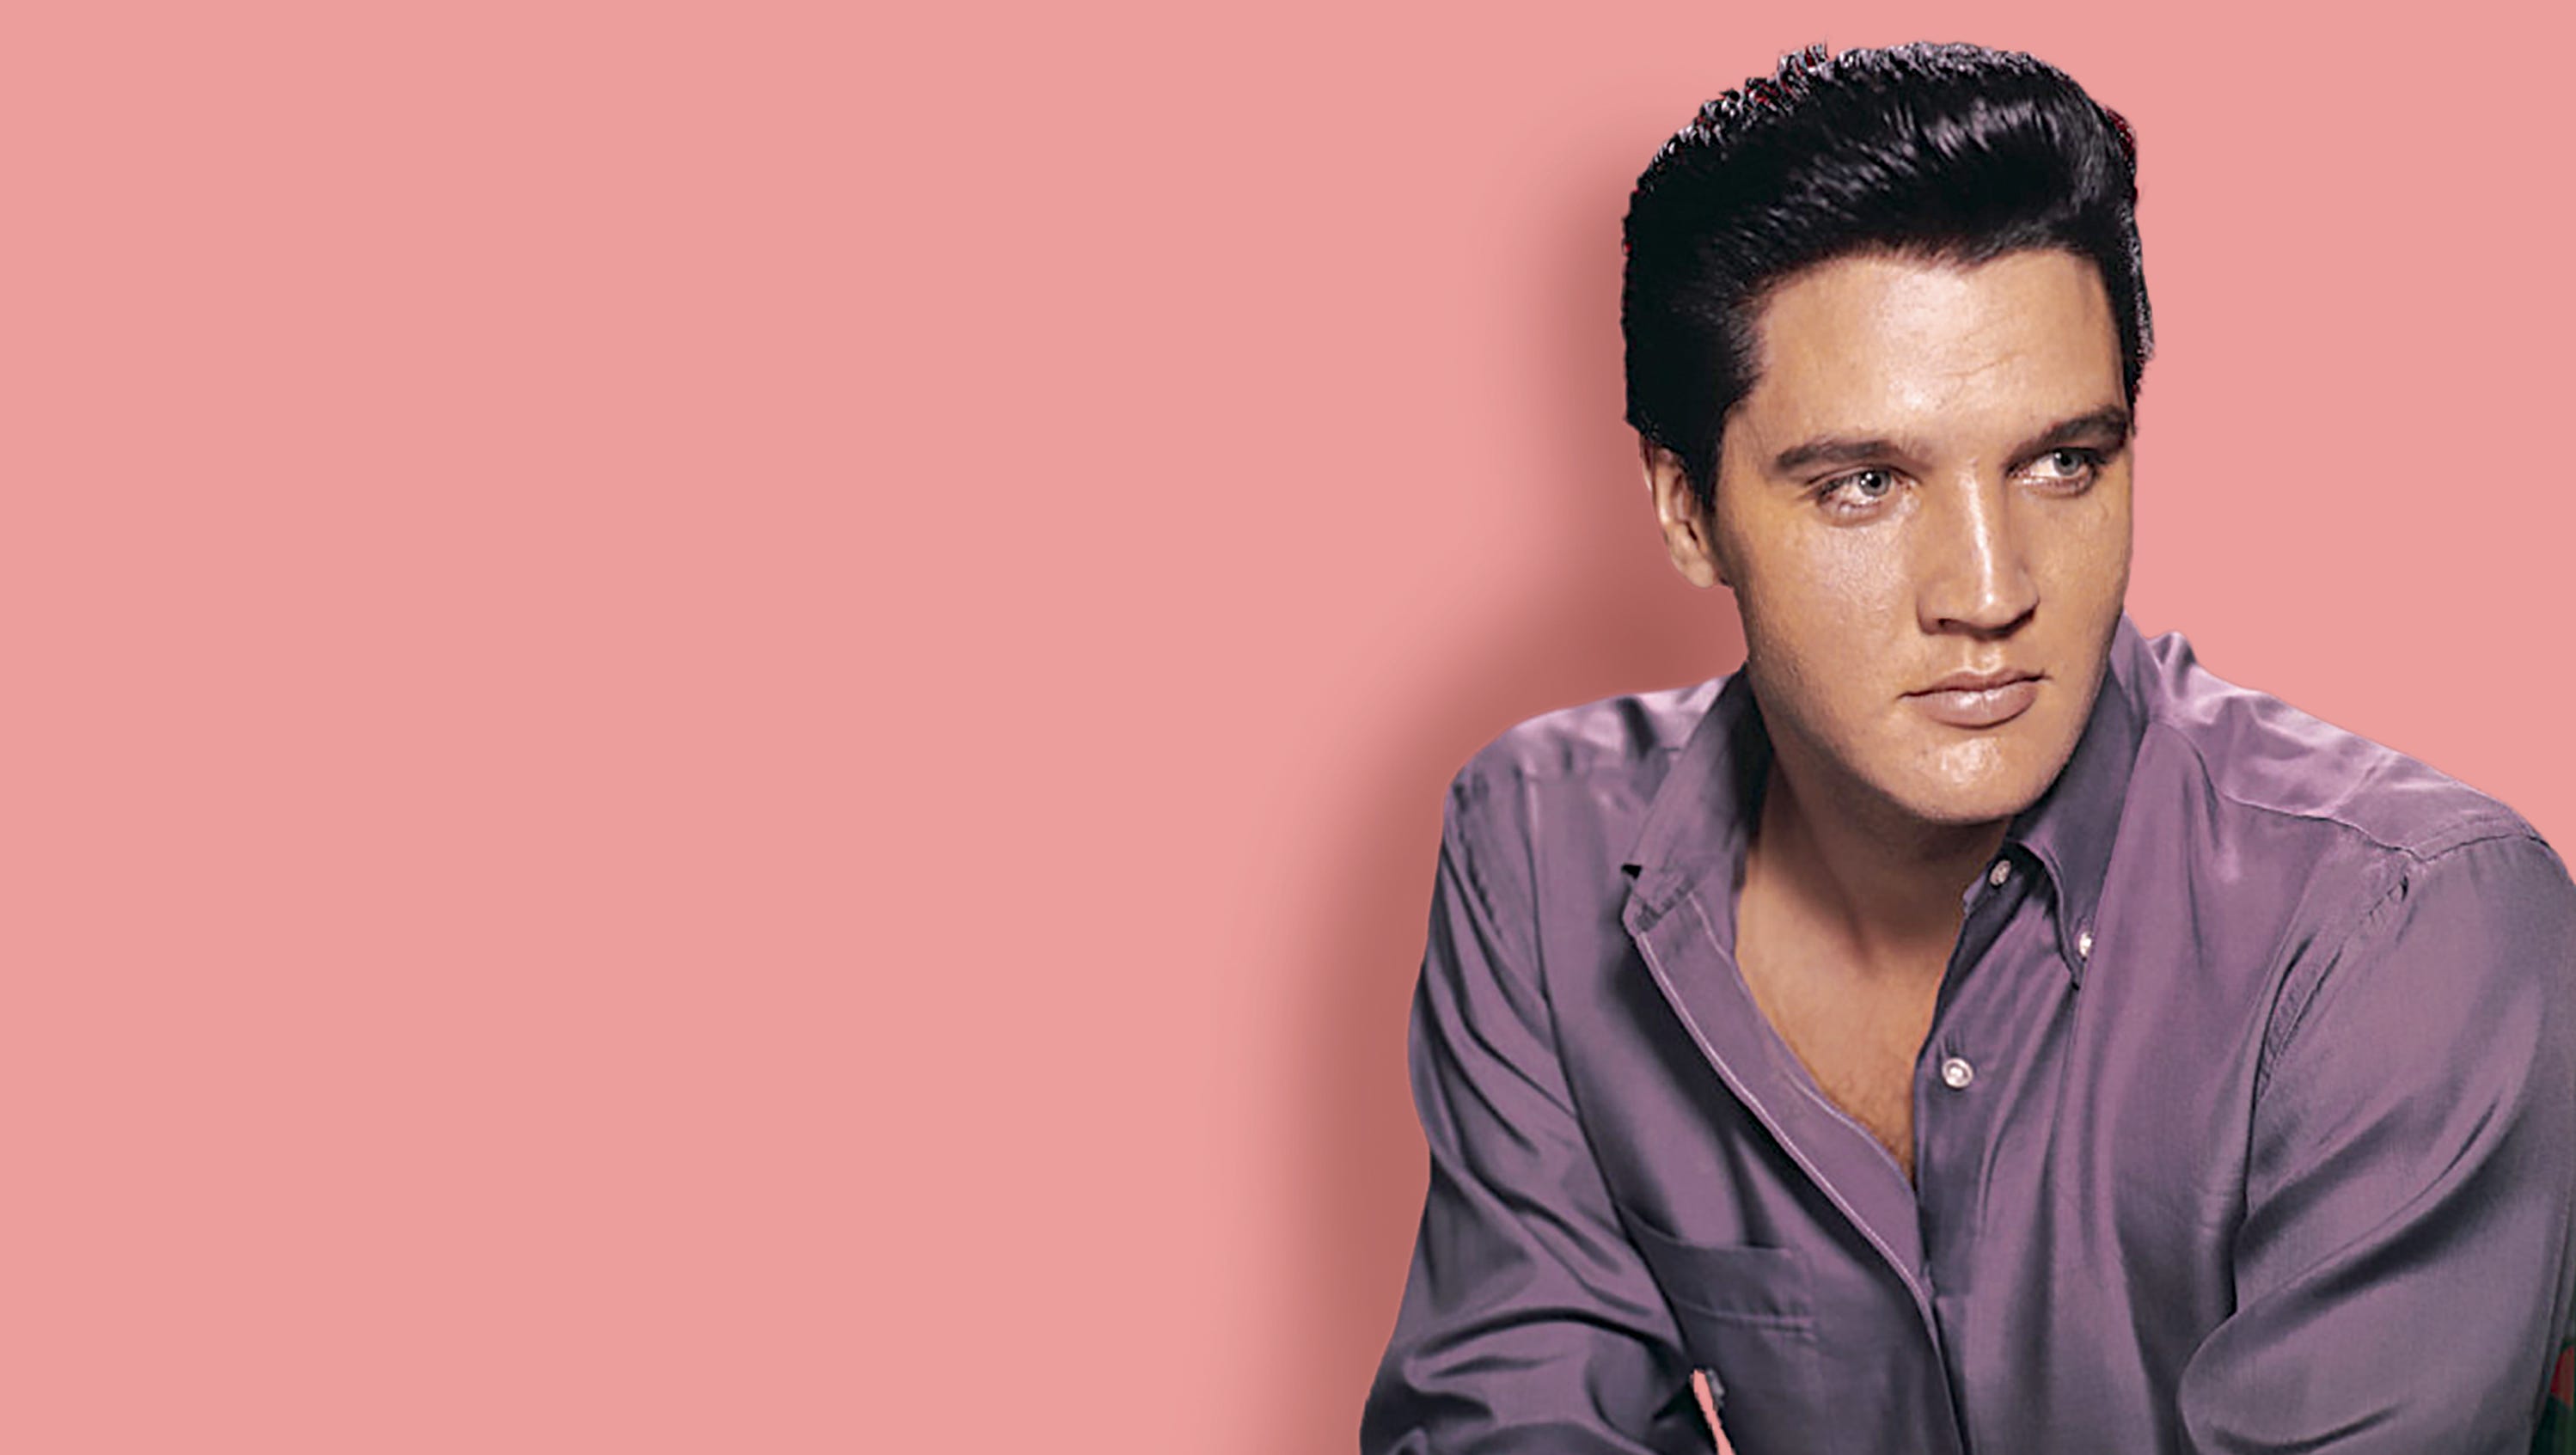 Elvis Presley's eternal fame celebrated 40 years after his death